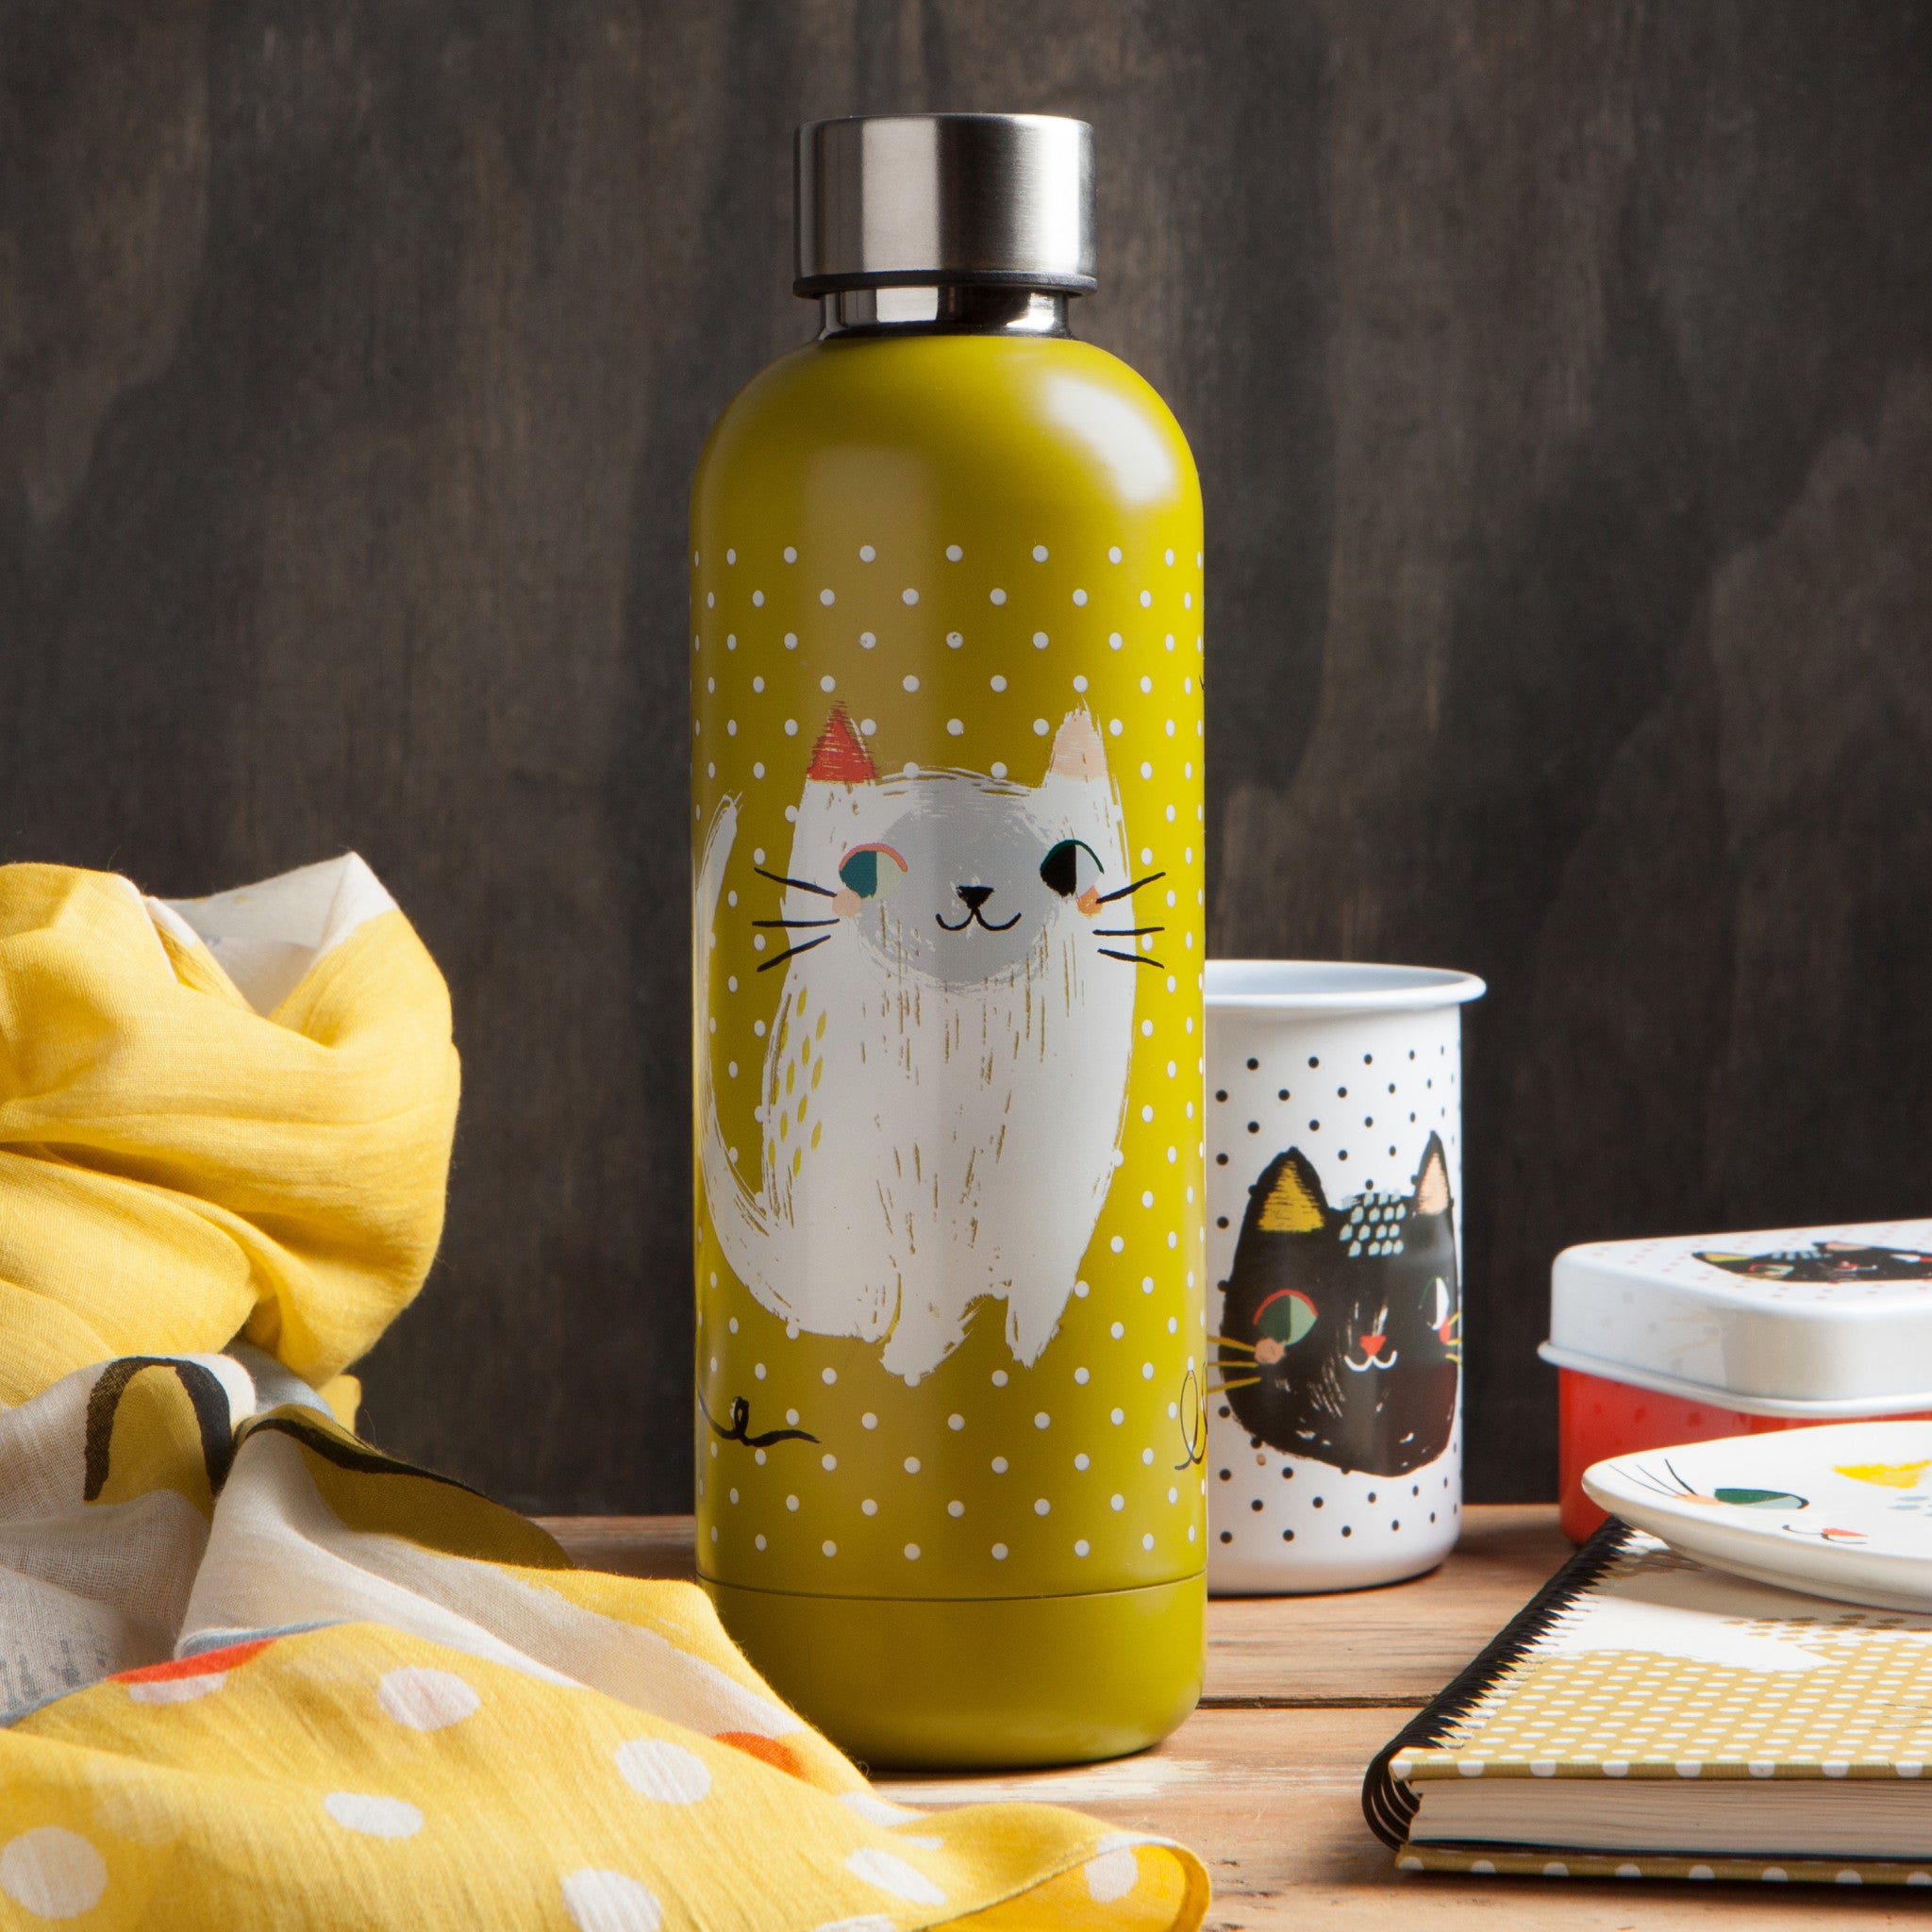 Meow Meow Water Bottle